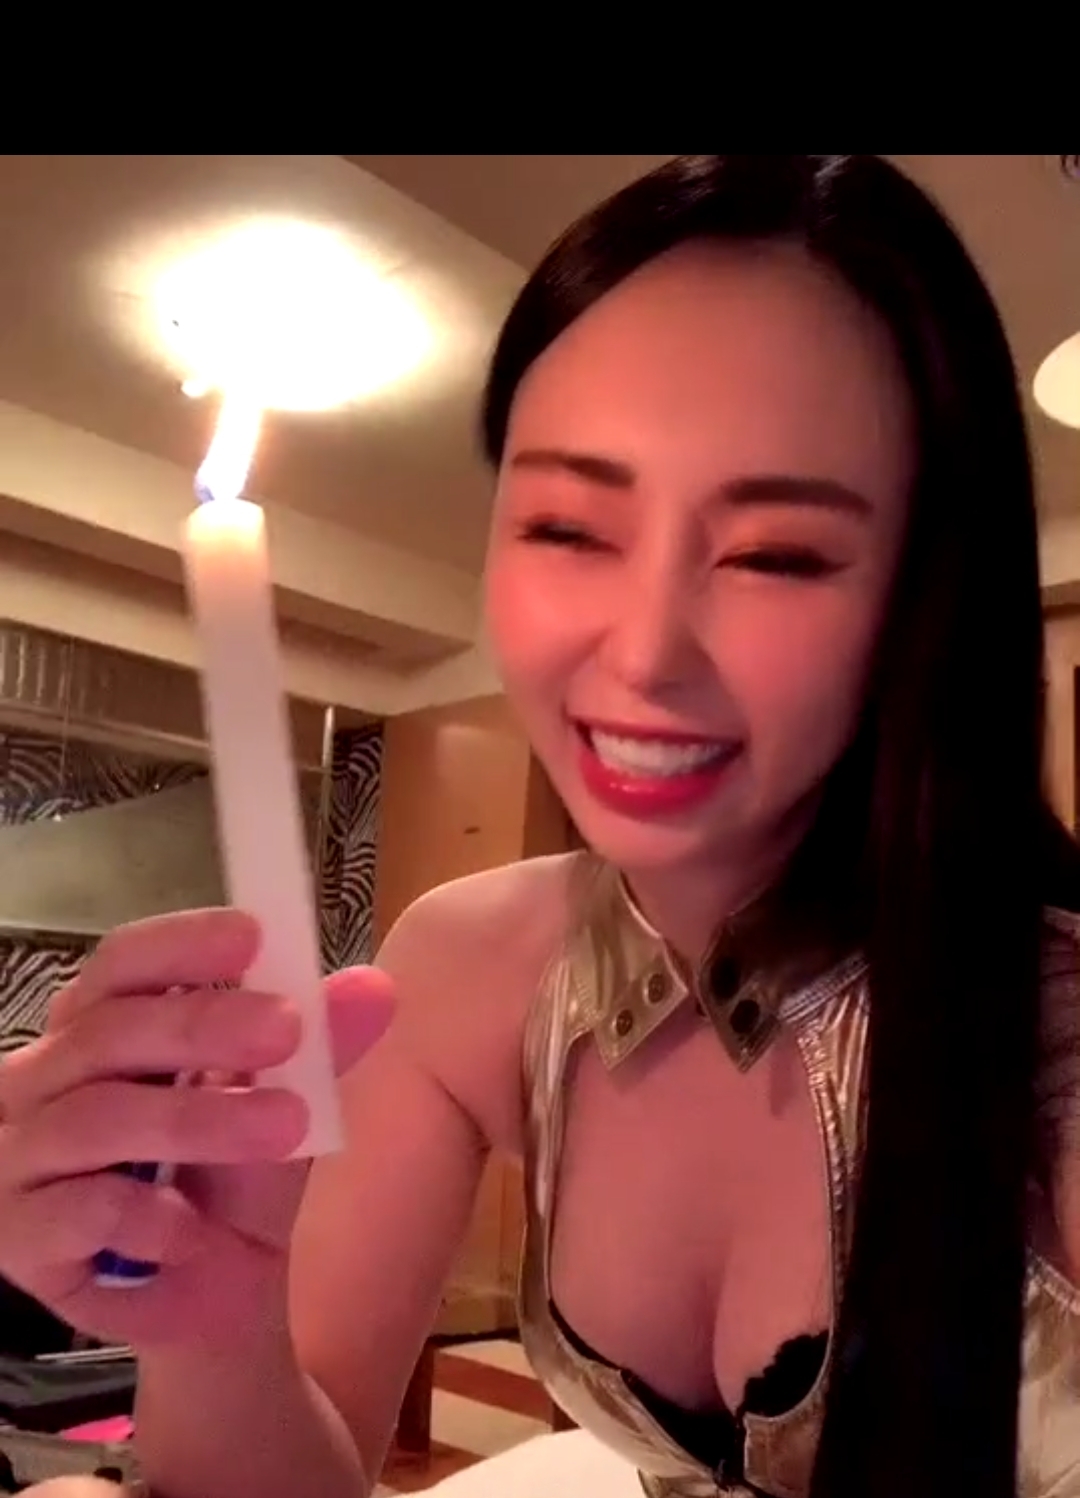 Candle into nipples